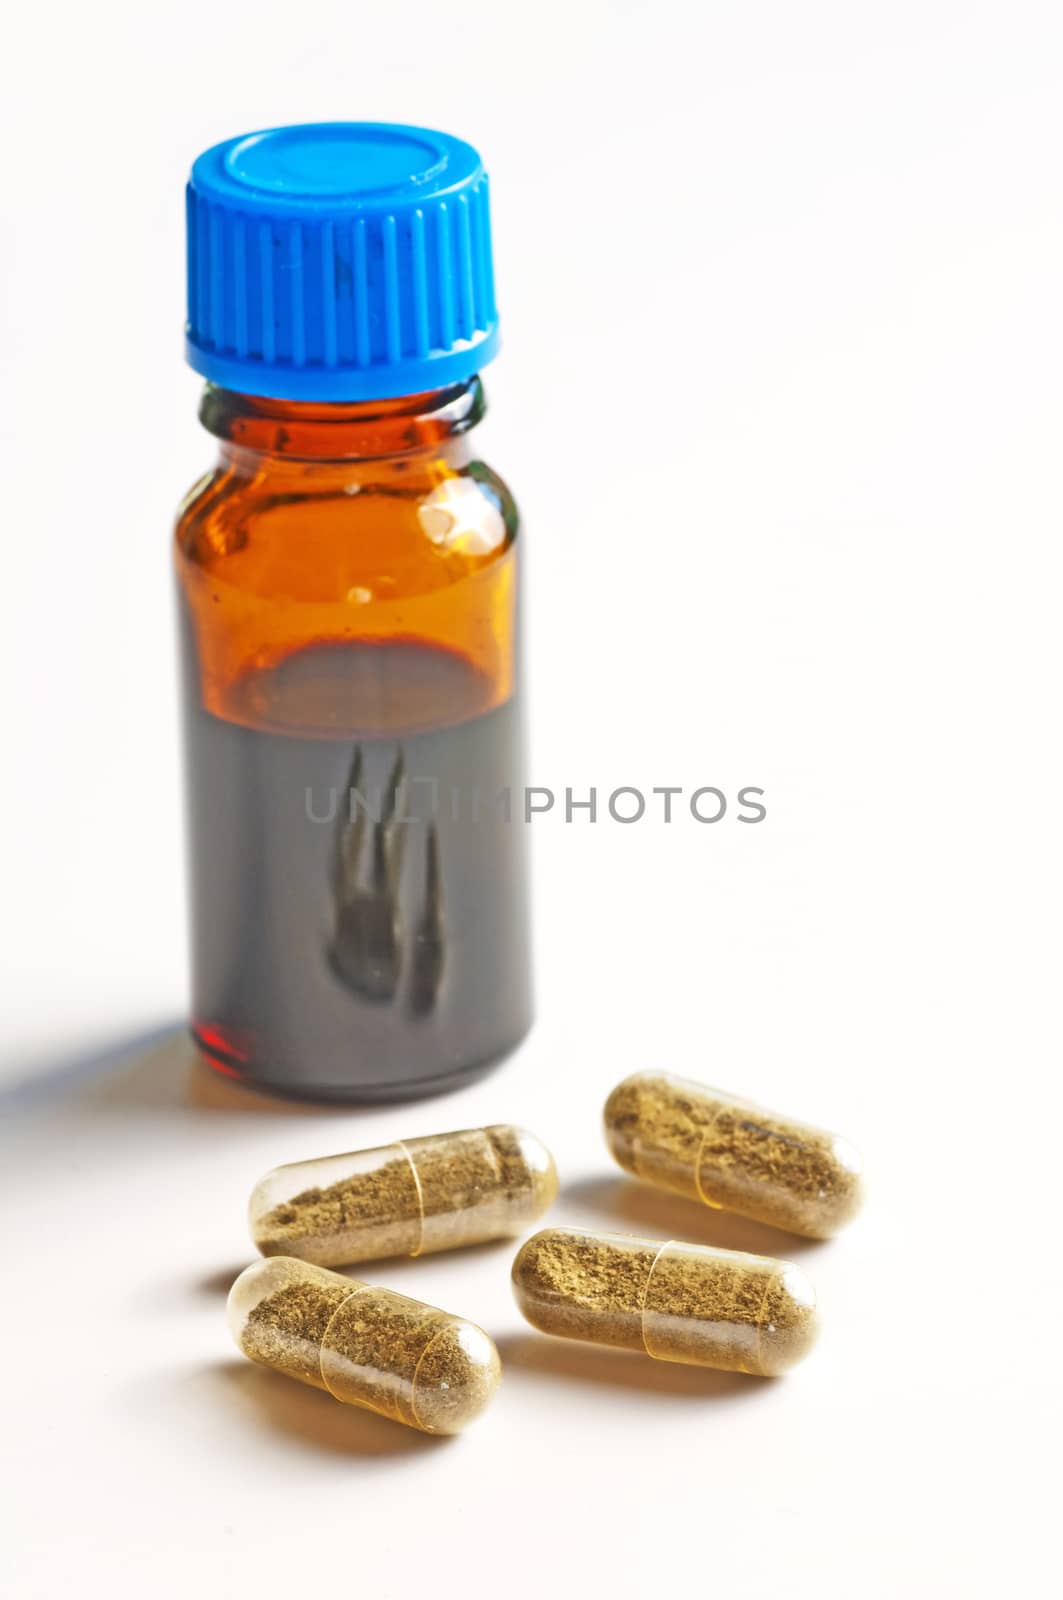 tincture and pills by Jochen